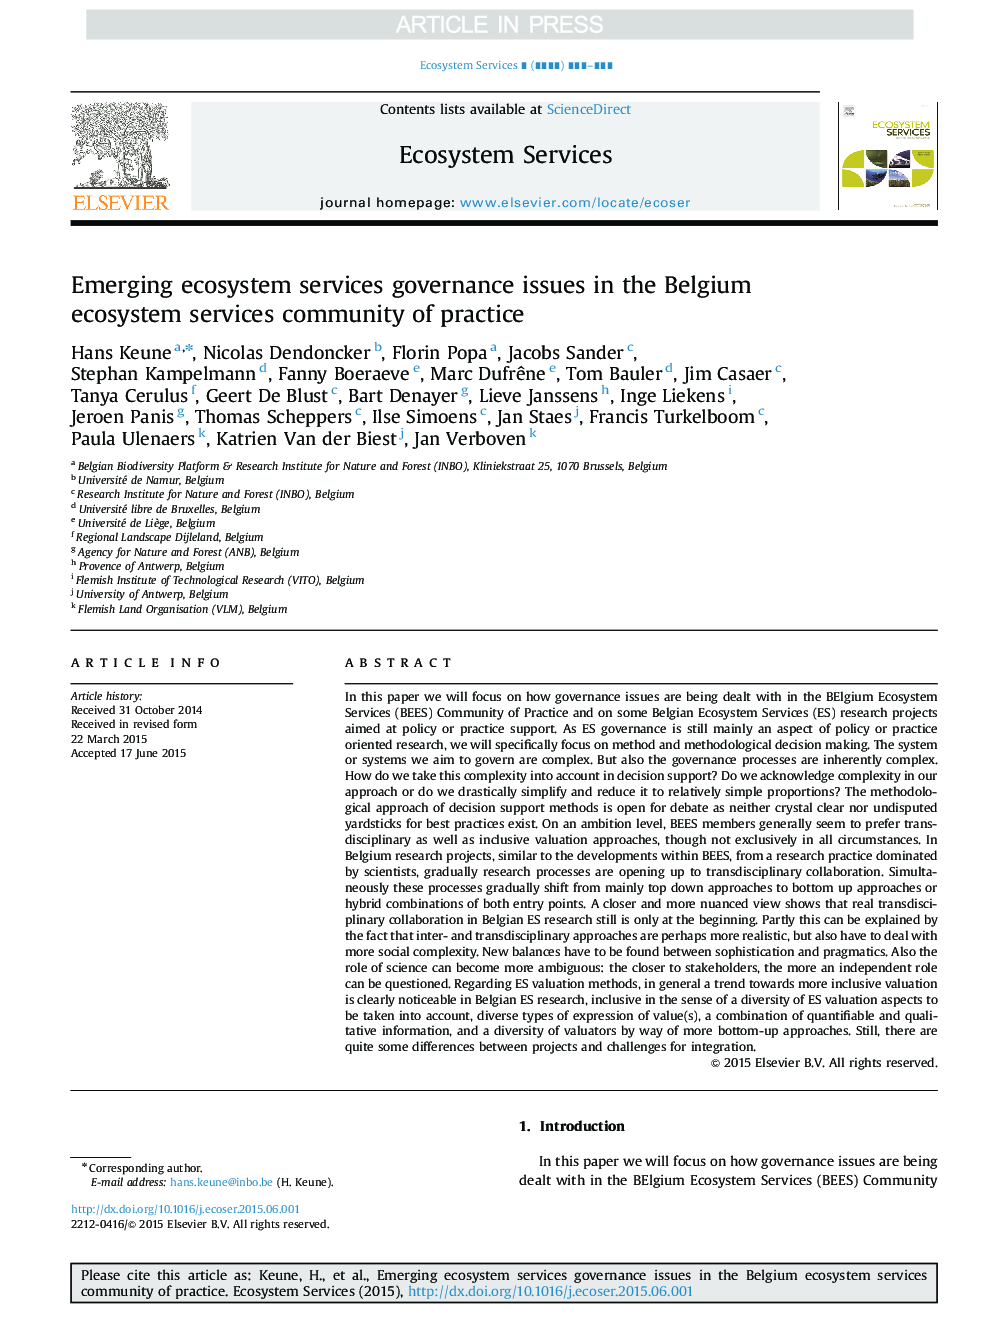 Emerging ecosystem services governance issues in the Belgium ecosystem services community of practice